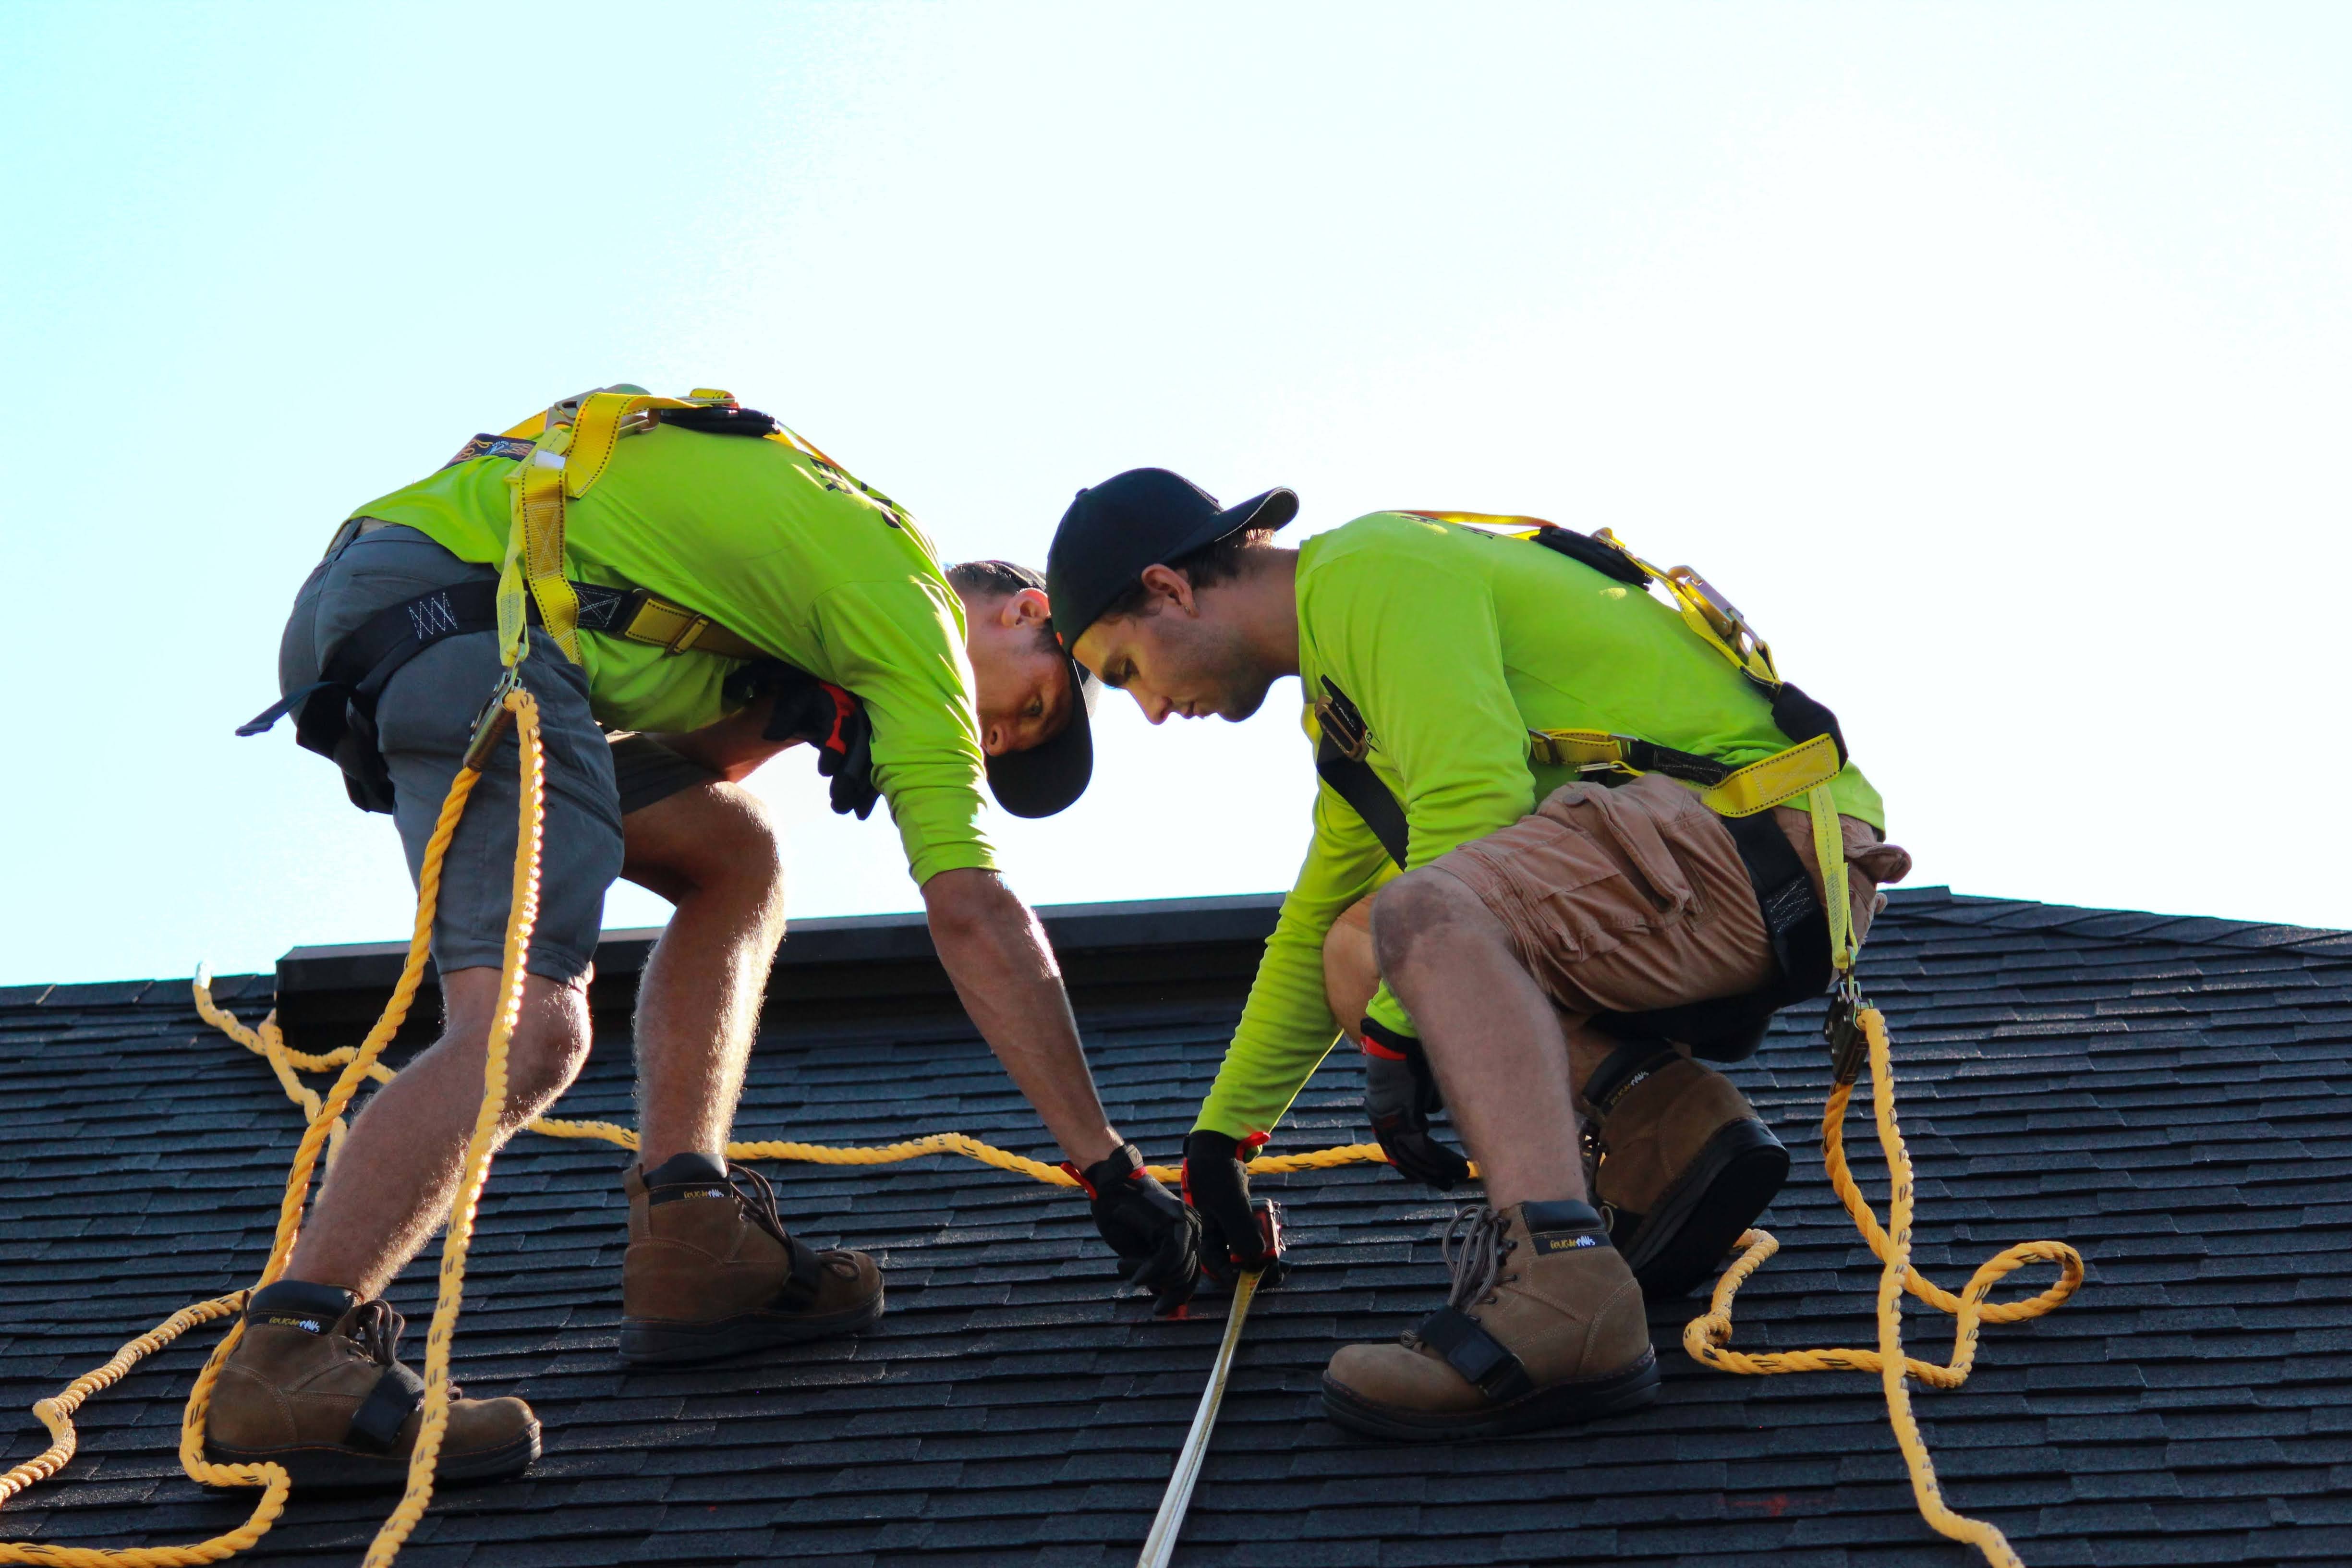 2 roofers wearing safety gear repairing a roof